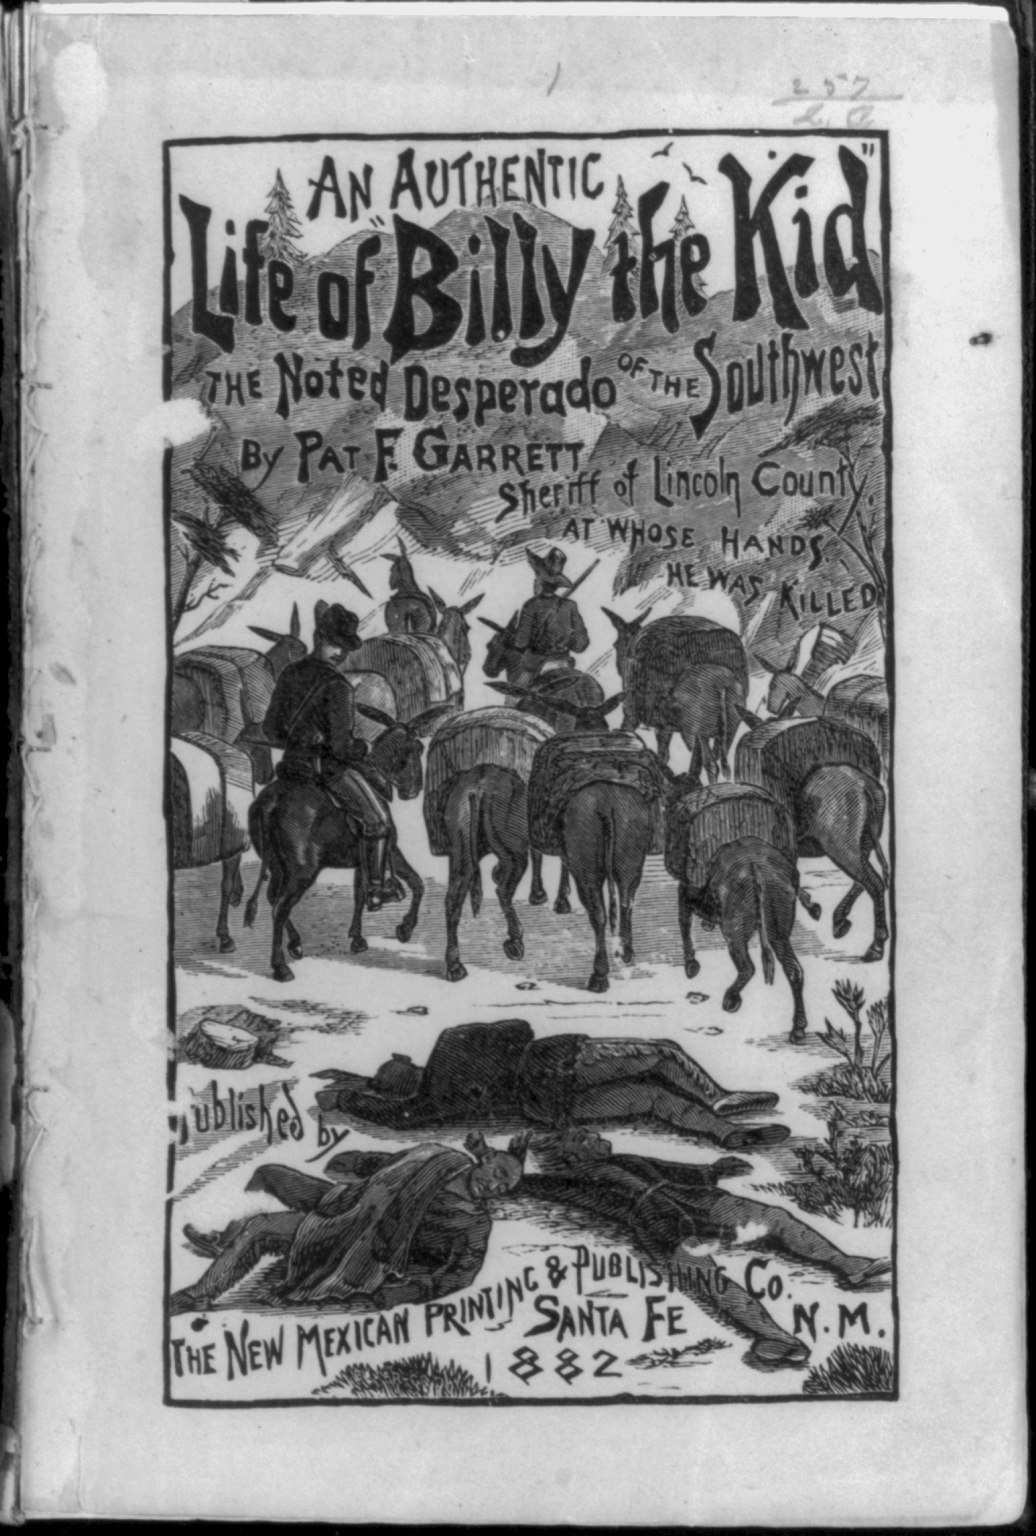 The Authentic Life of Billy the Kid Epub-Ebook